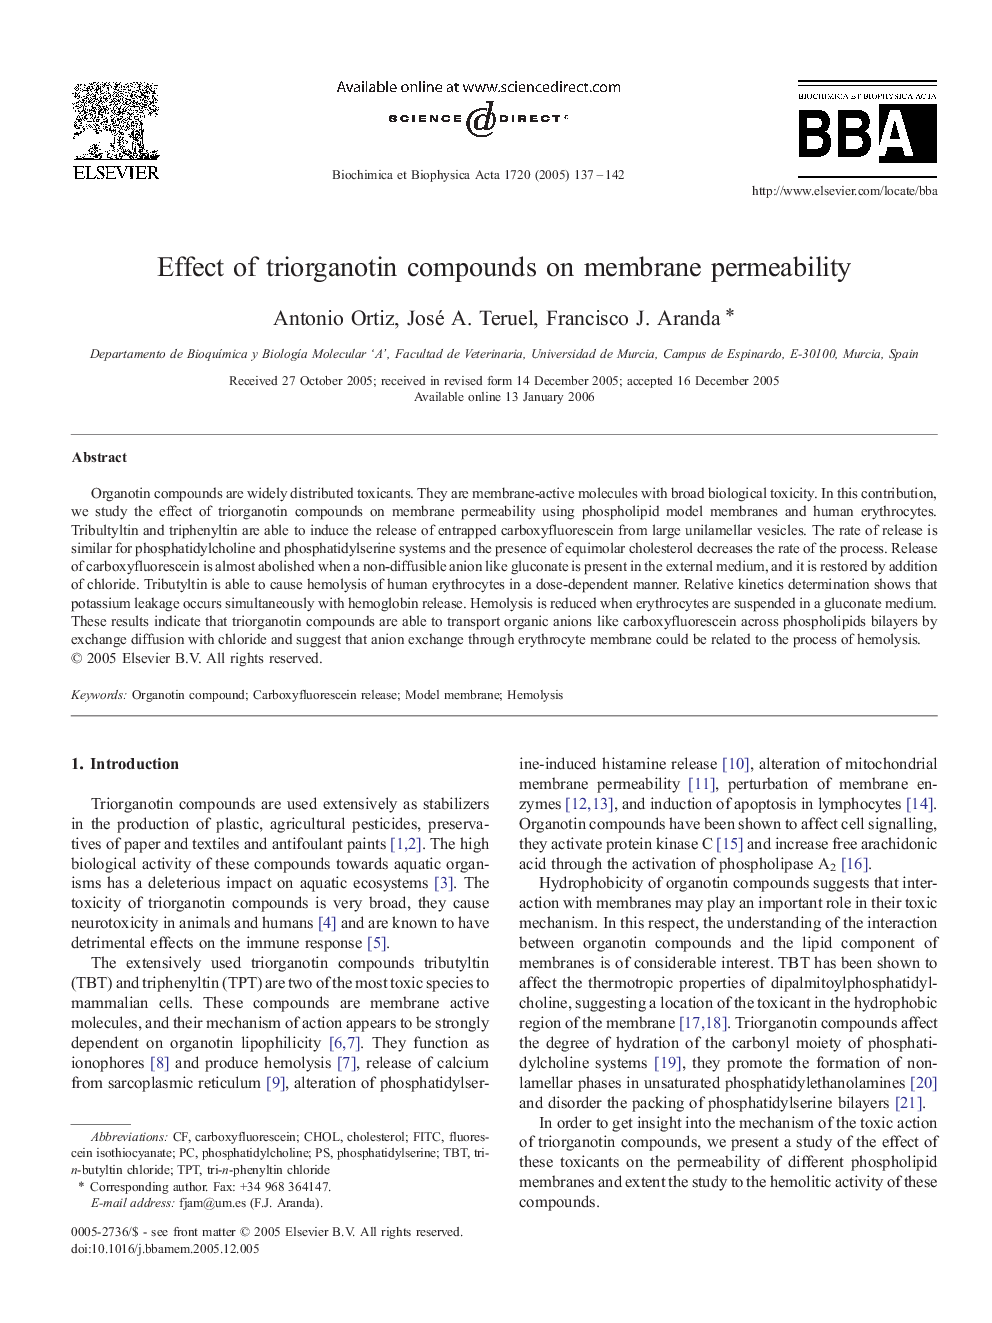 Effect of triorganotin compounds on membrane permeability